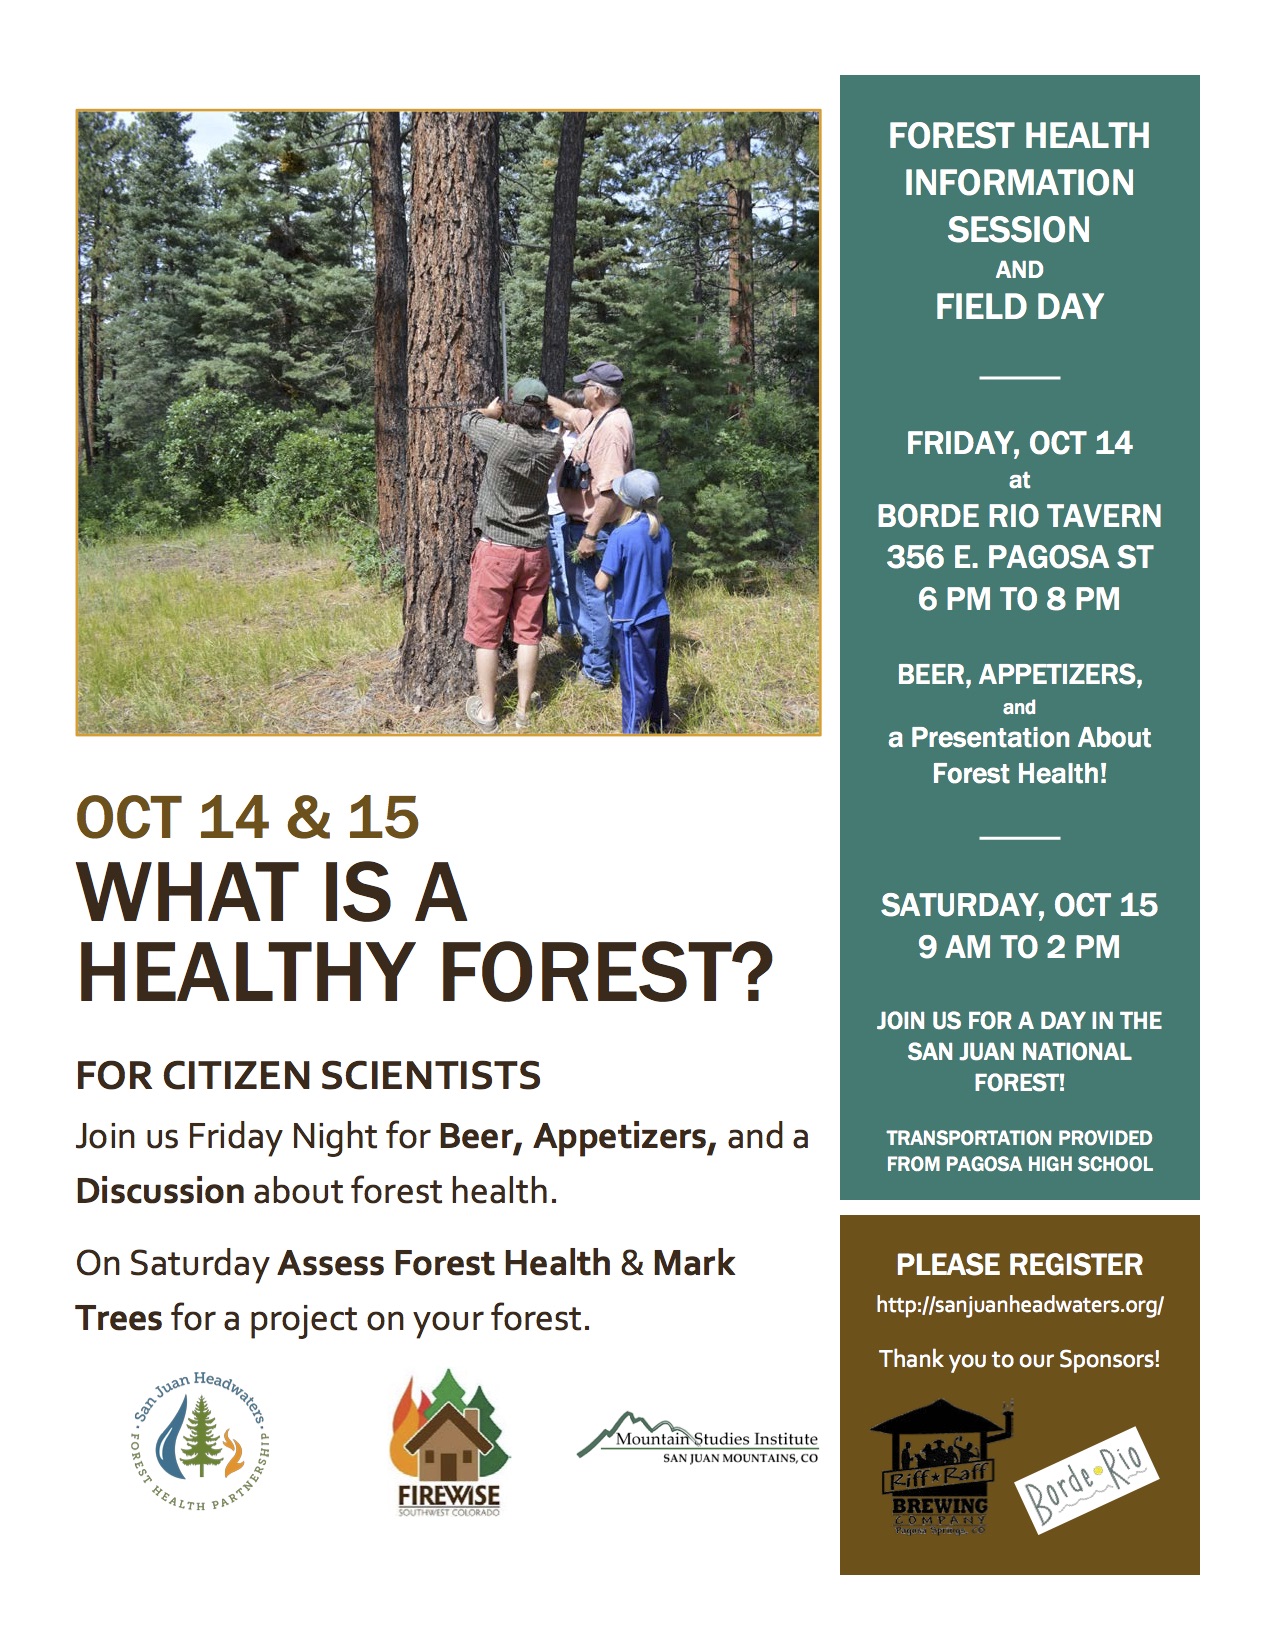 Forest Health Citizen Science Opportunity